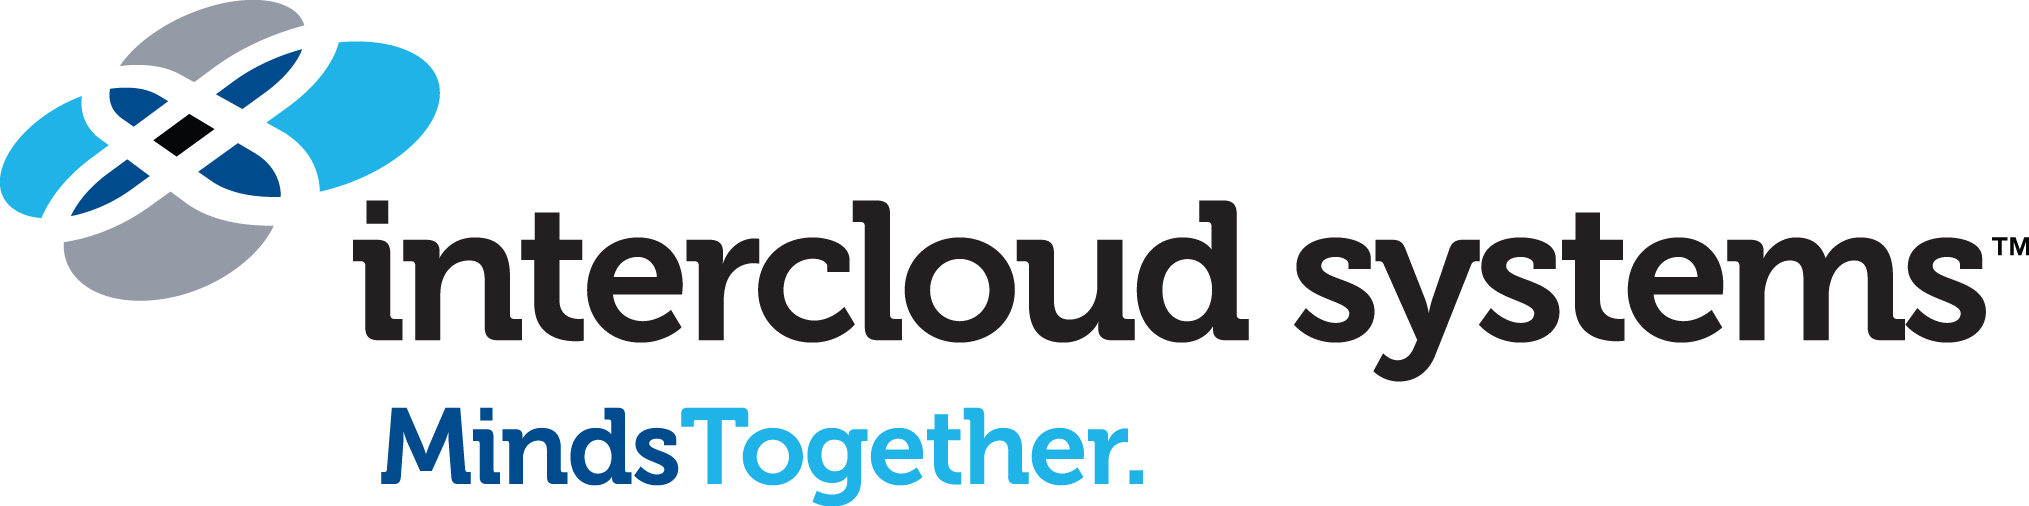 InterCloud Systems Inc